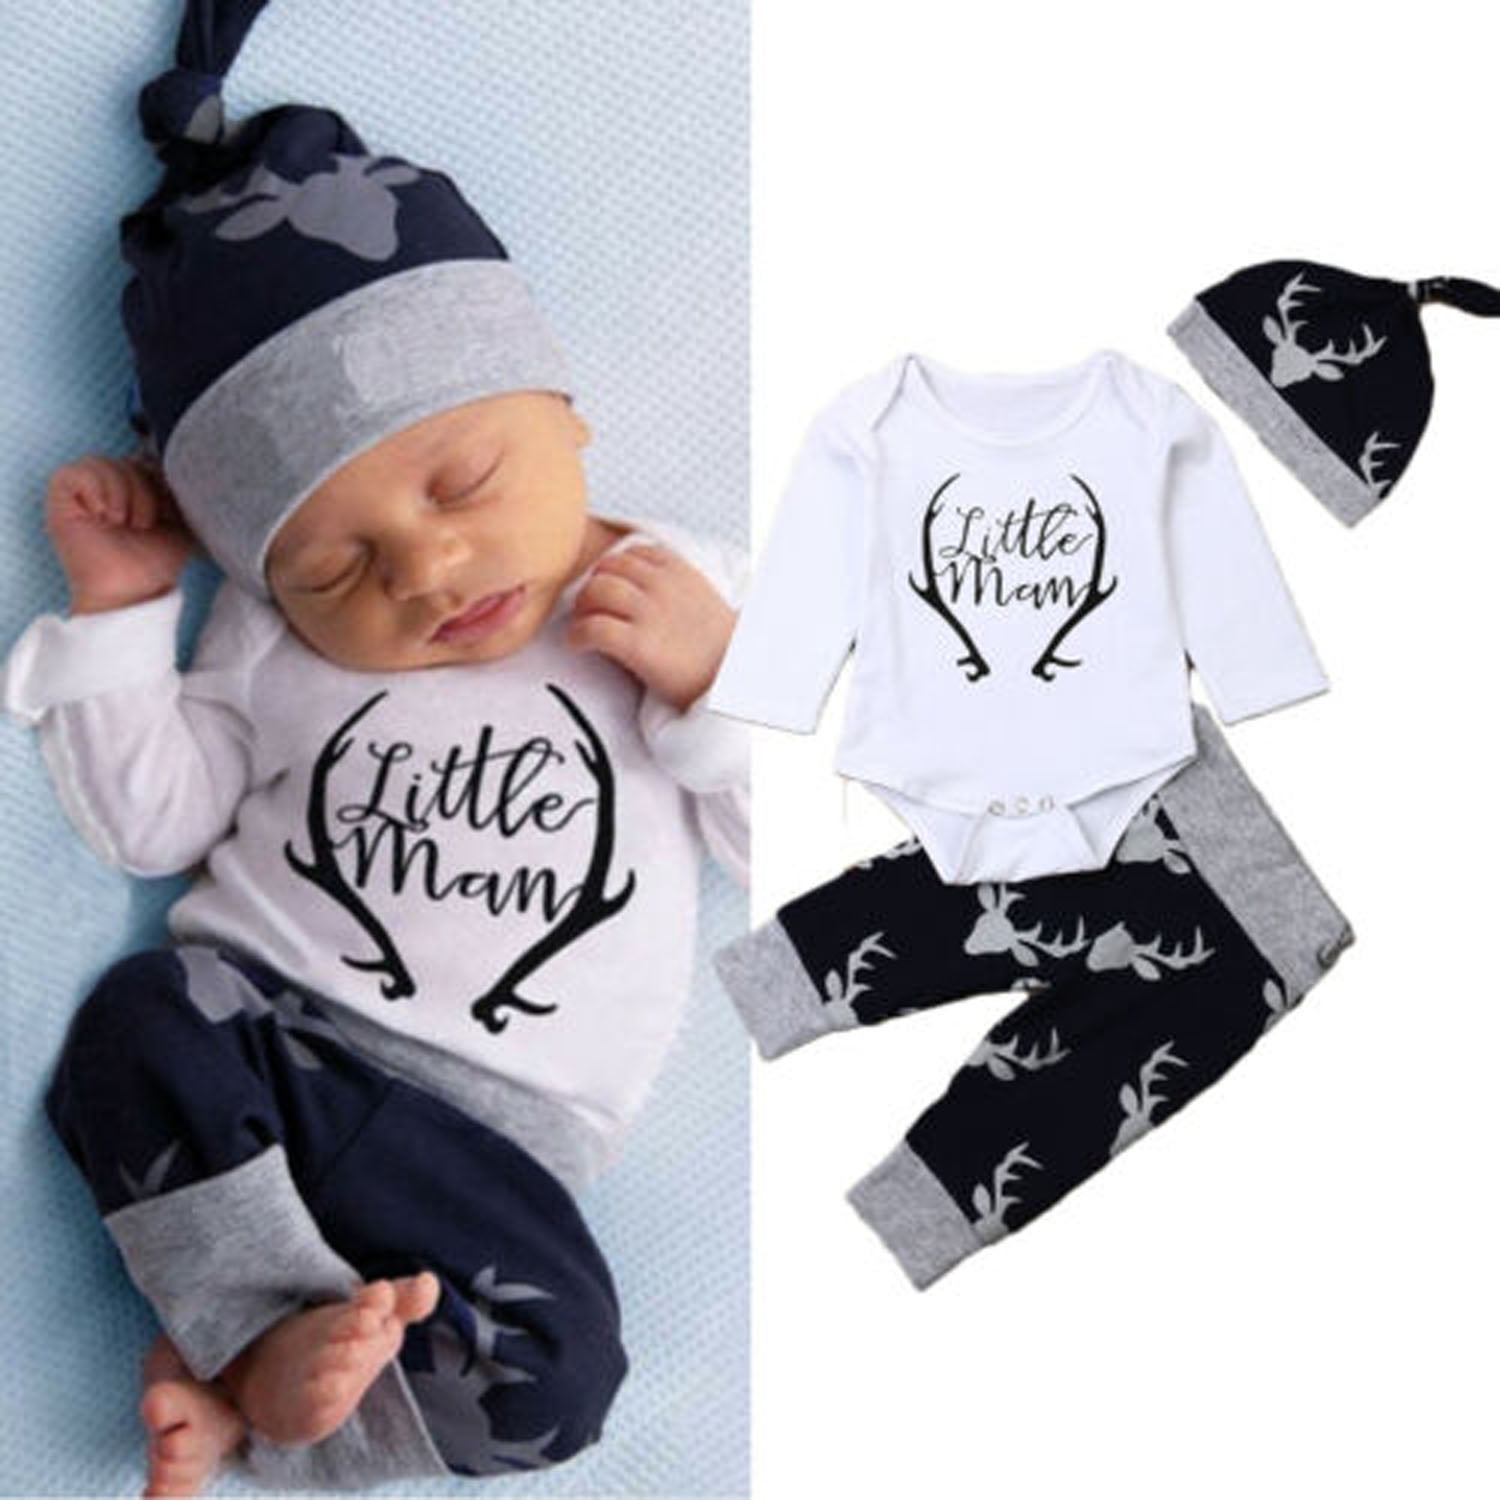 New Baby Outfit Top and Top Baby Boy Clothing Set Summer Cotton Short Sleeve Romper Tops+Shorts Infant Boys Outfits Toddler Boy Clothes Gray 